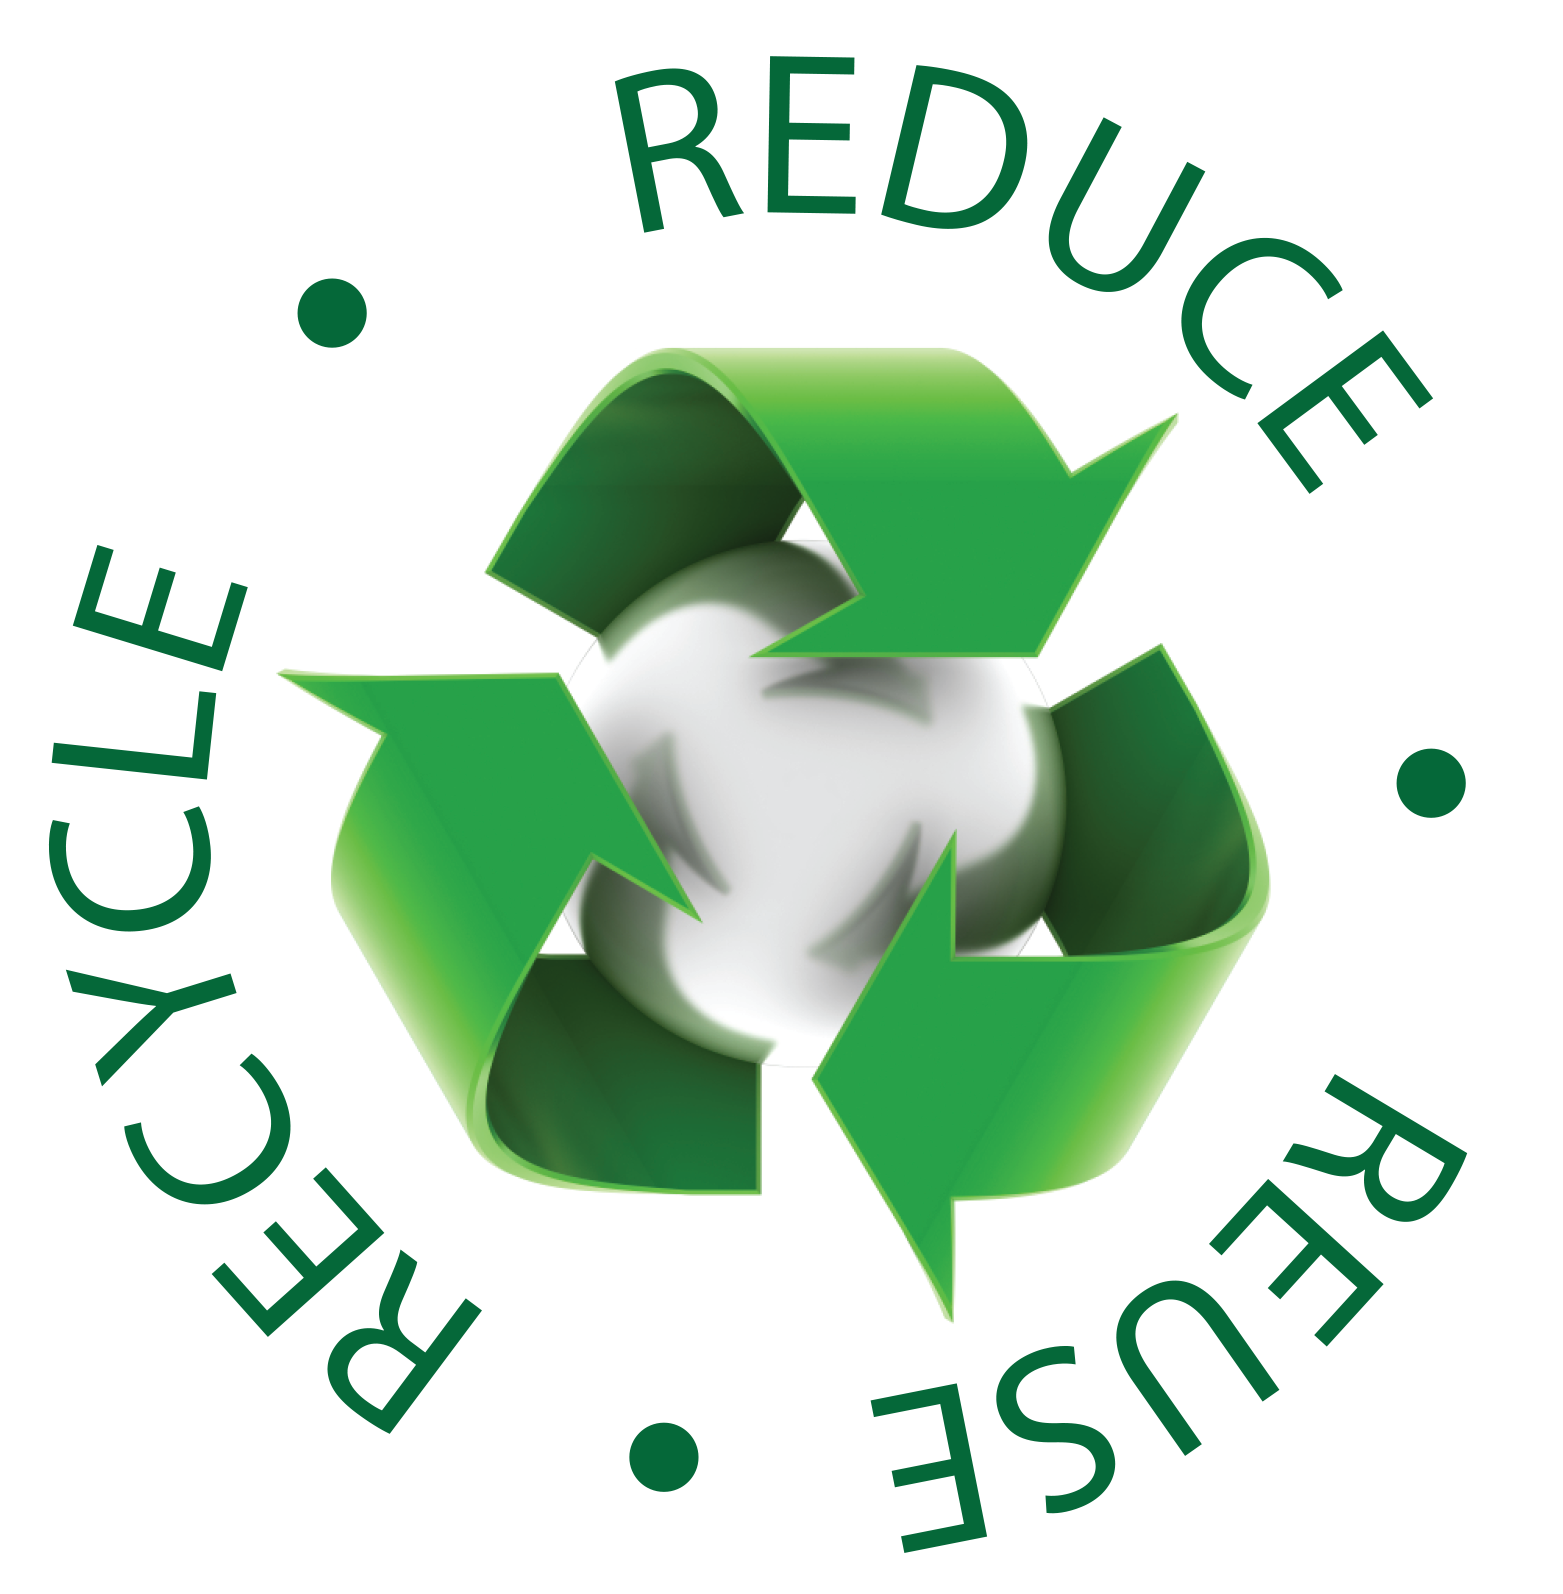 Reduce reuse recycle examples